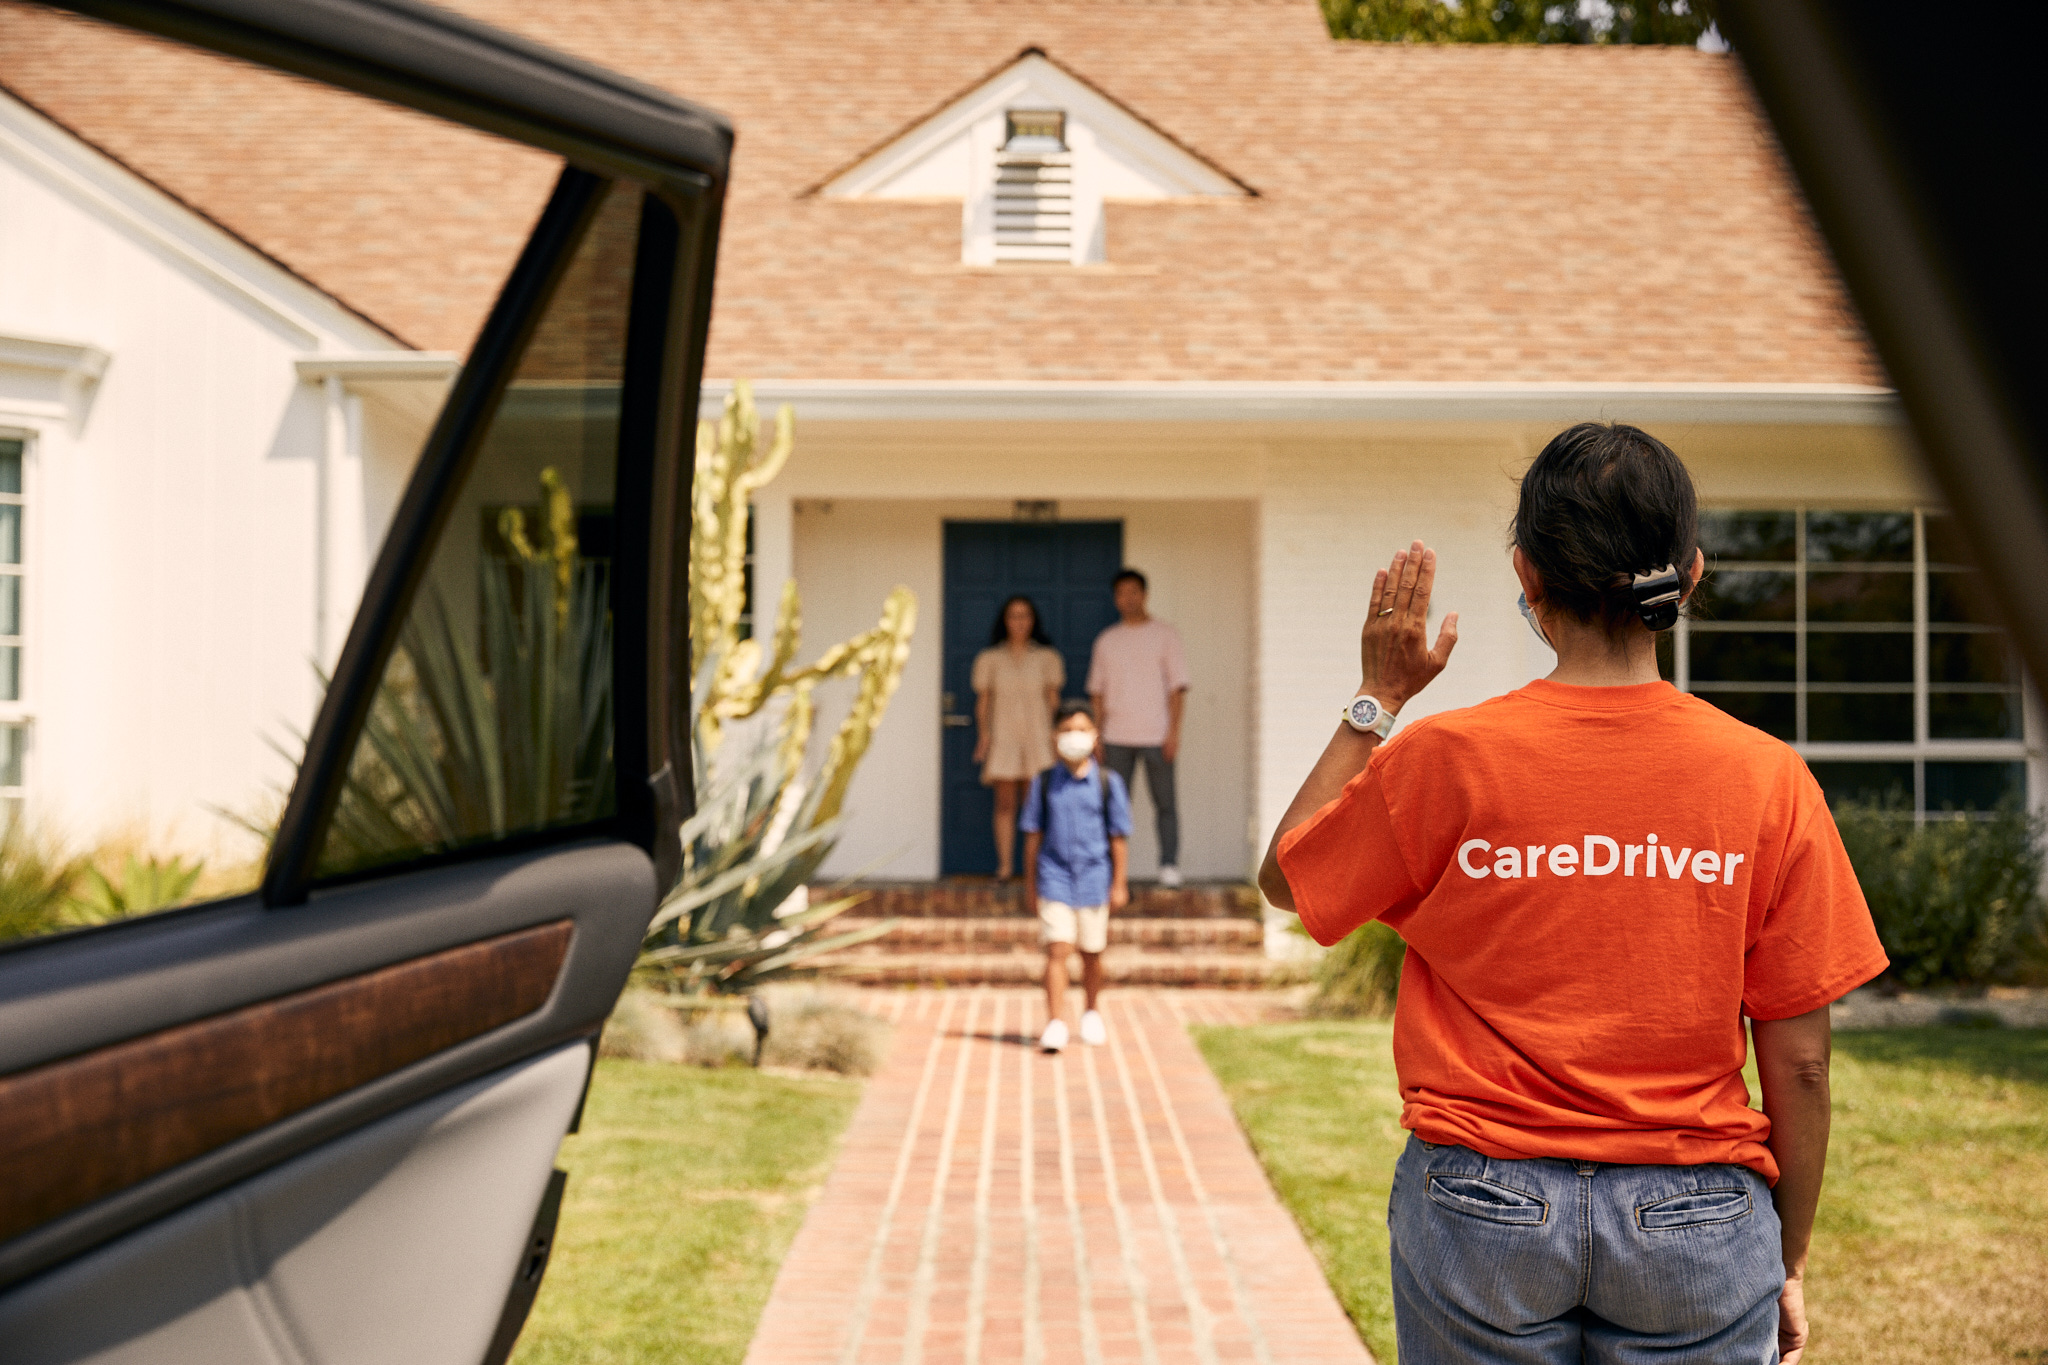 HopSkipDrive CareDrivers by the numbers